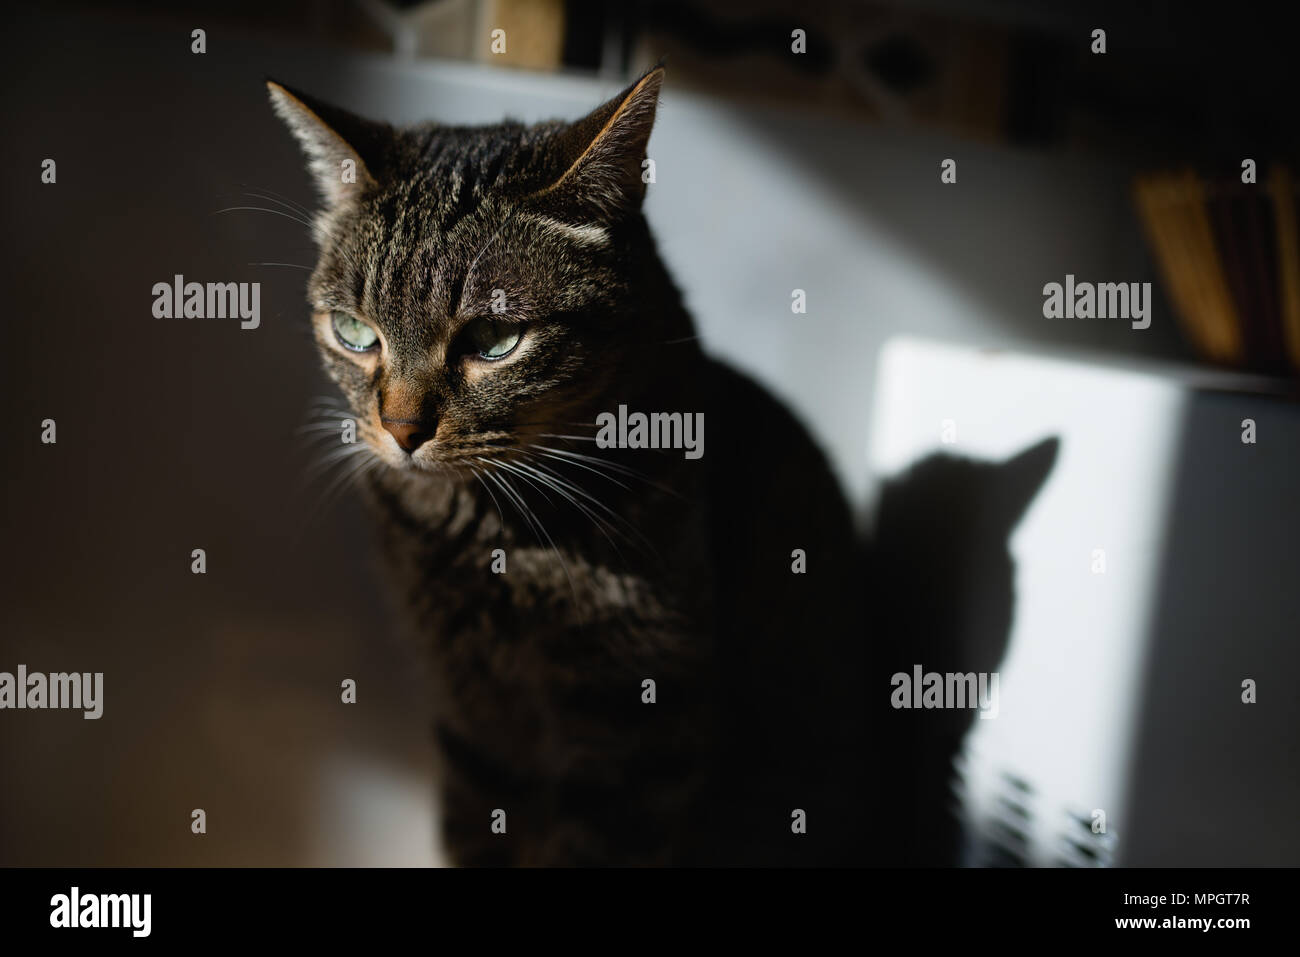 Beautiful tabby cat portrait at home Stock Photo